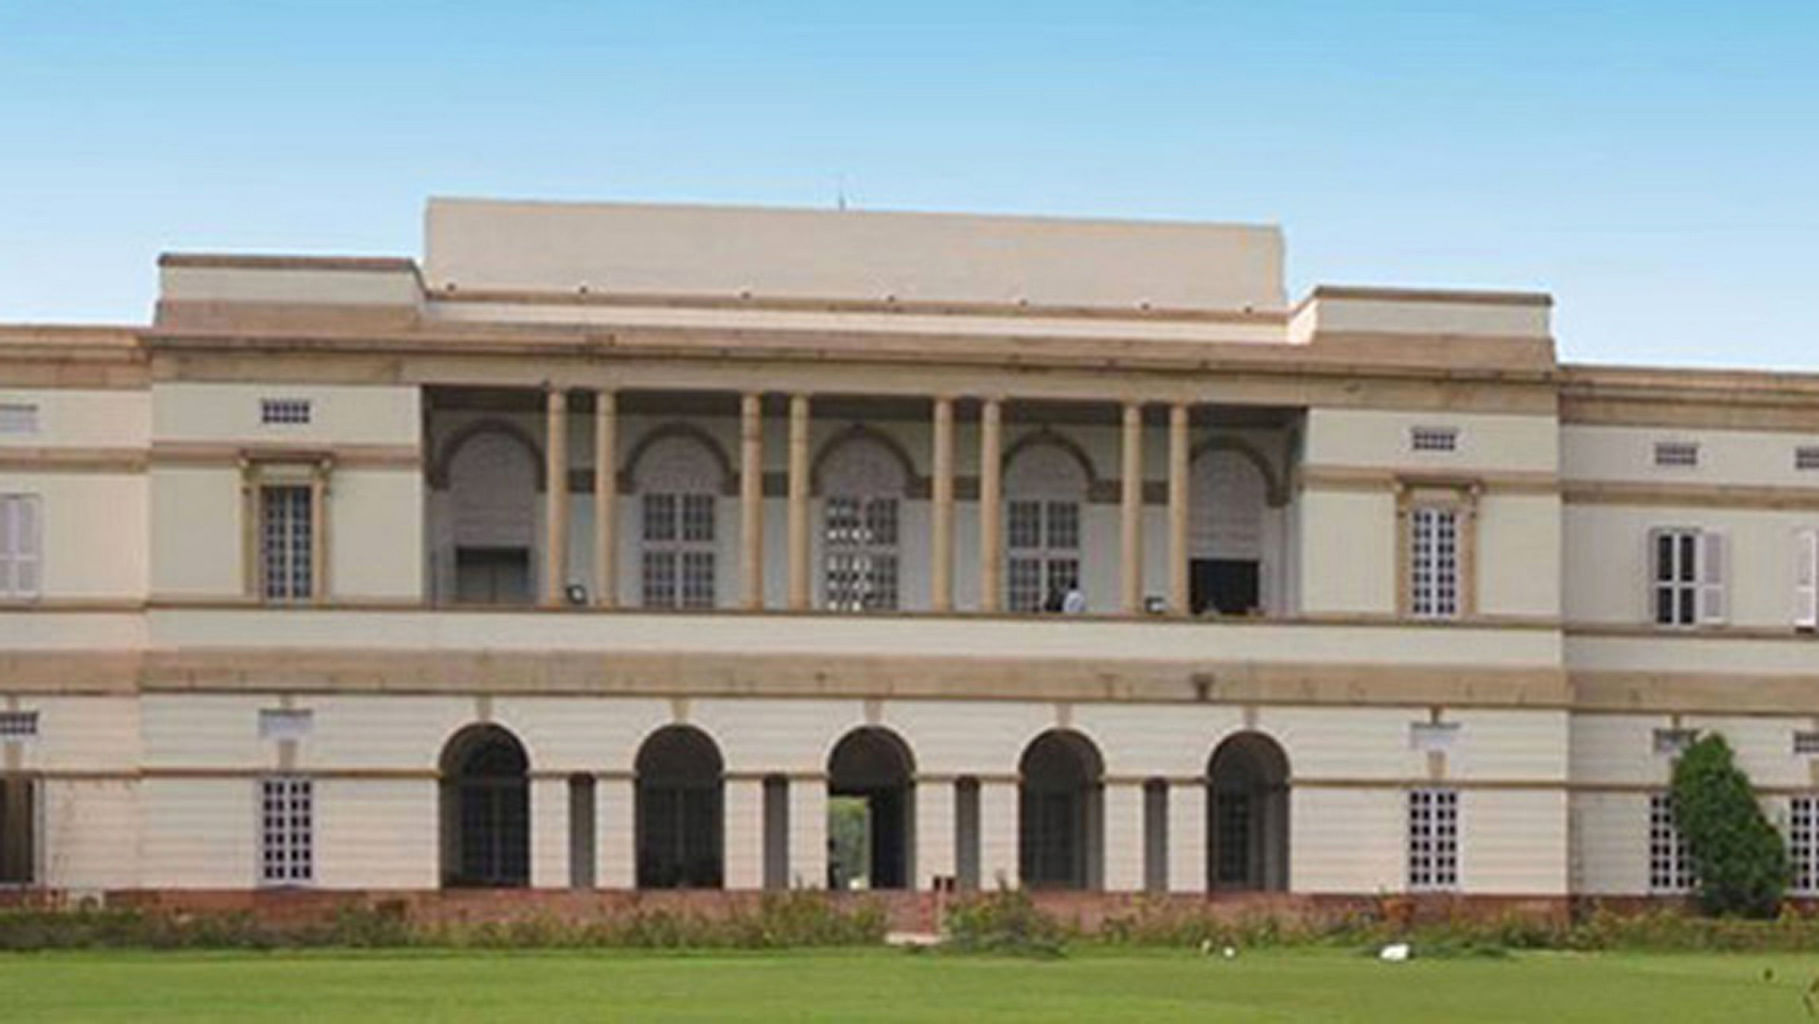 The Nehru Memorial Museum and Library  in New Delhi. (Photo Courtesy: <a href="http://nehrumemorial.nic.in/en/">Nehru Memorial Museum and Library</a>)